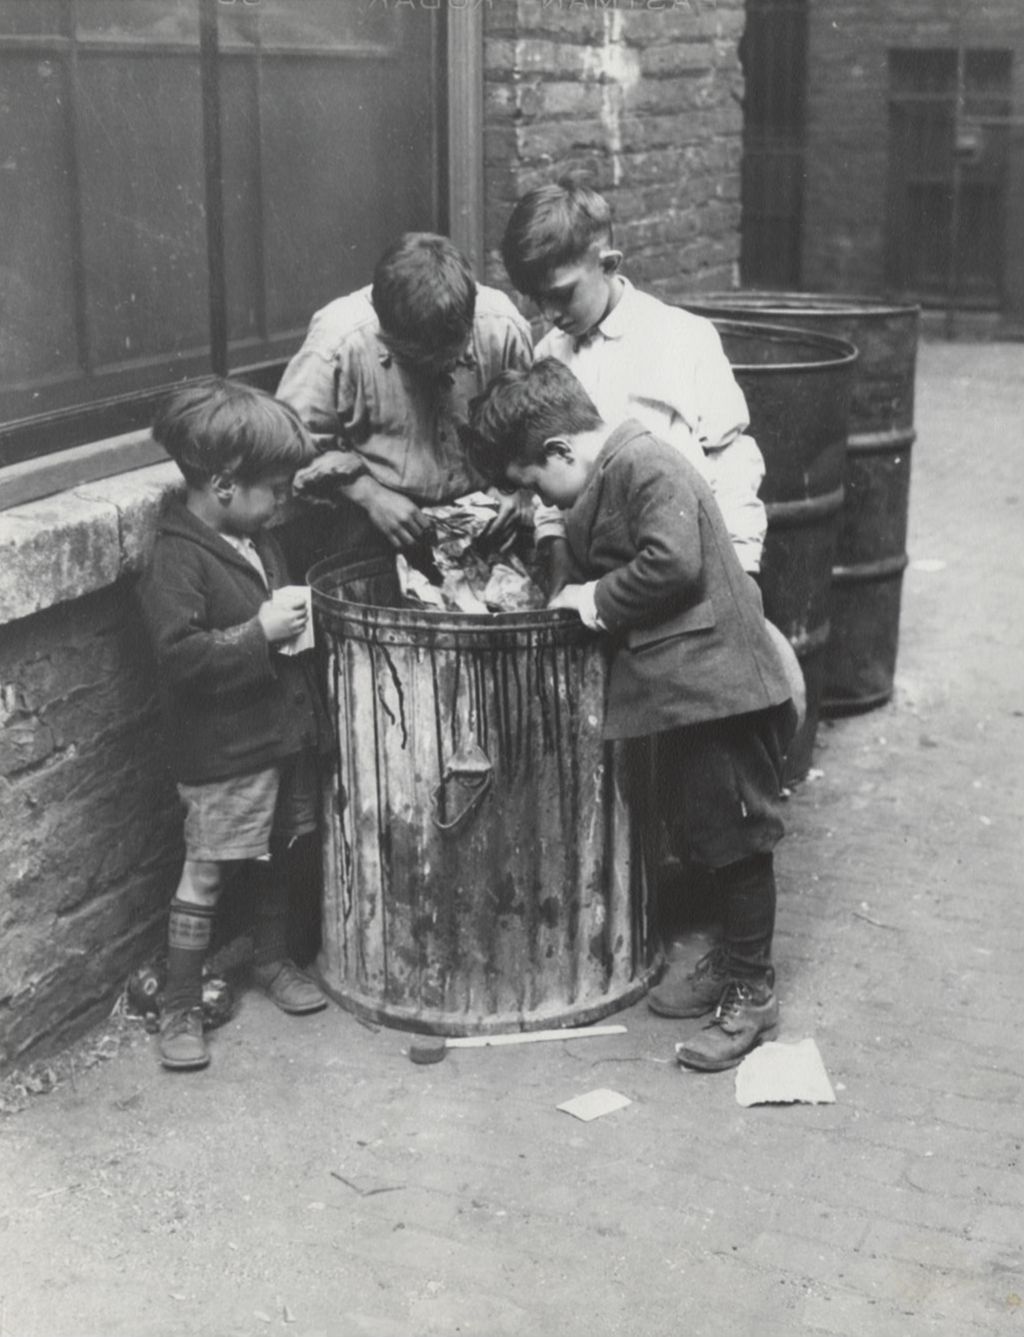 Four boys digging through garbage can in alley